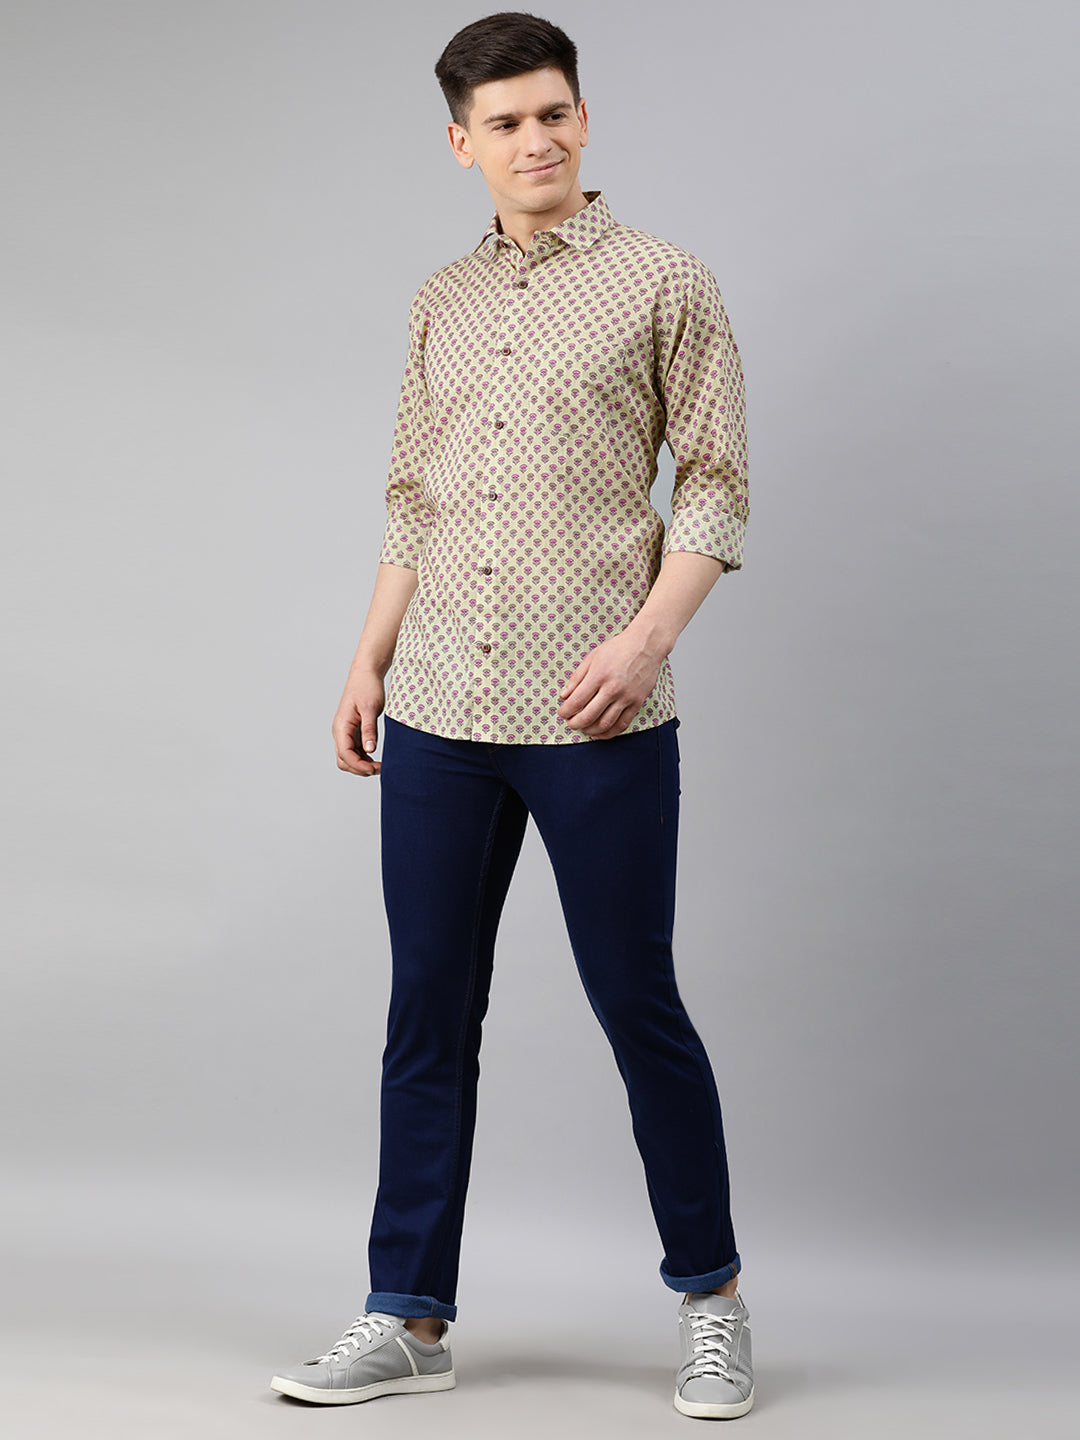 Yellow Cotton Full Sleeves Shirts For Men-MMF0229 - NOZ2TOZ